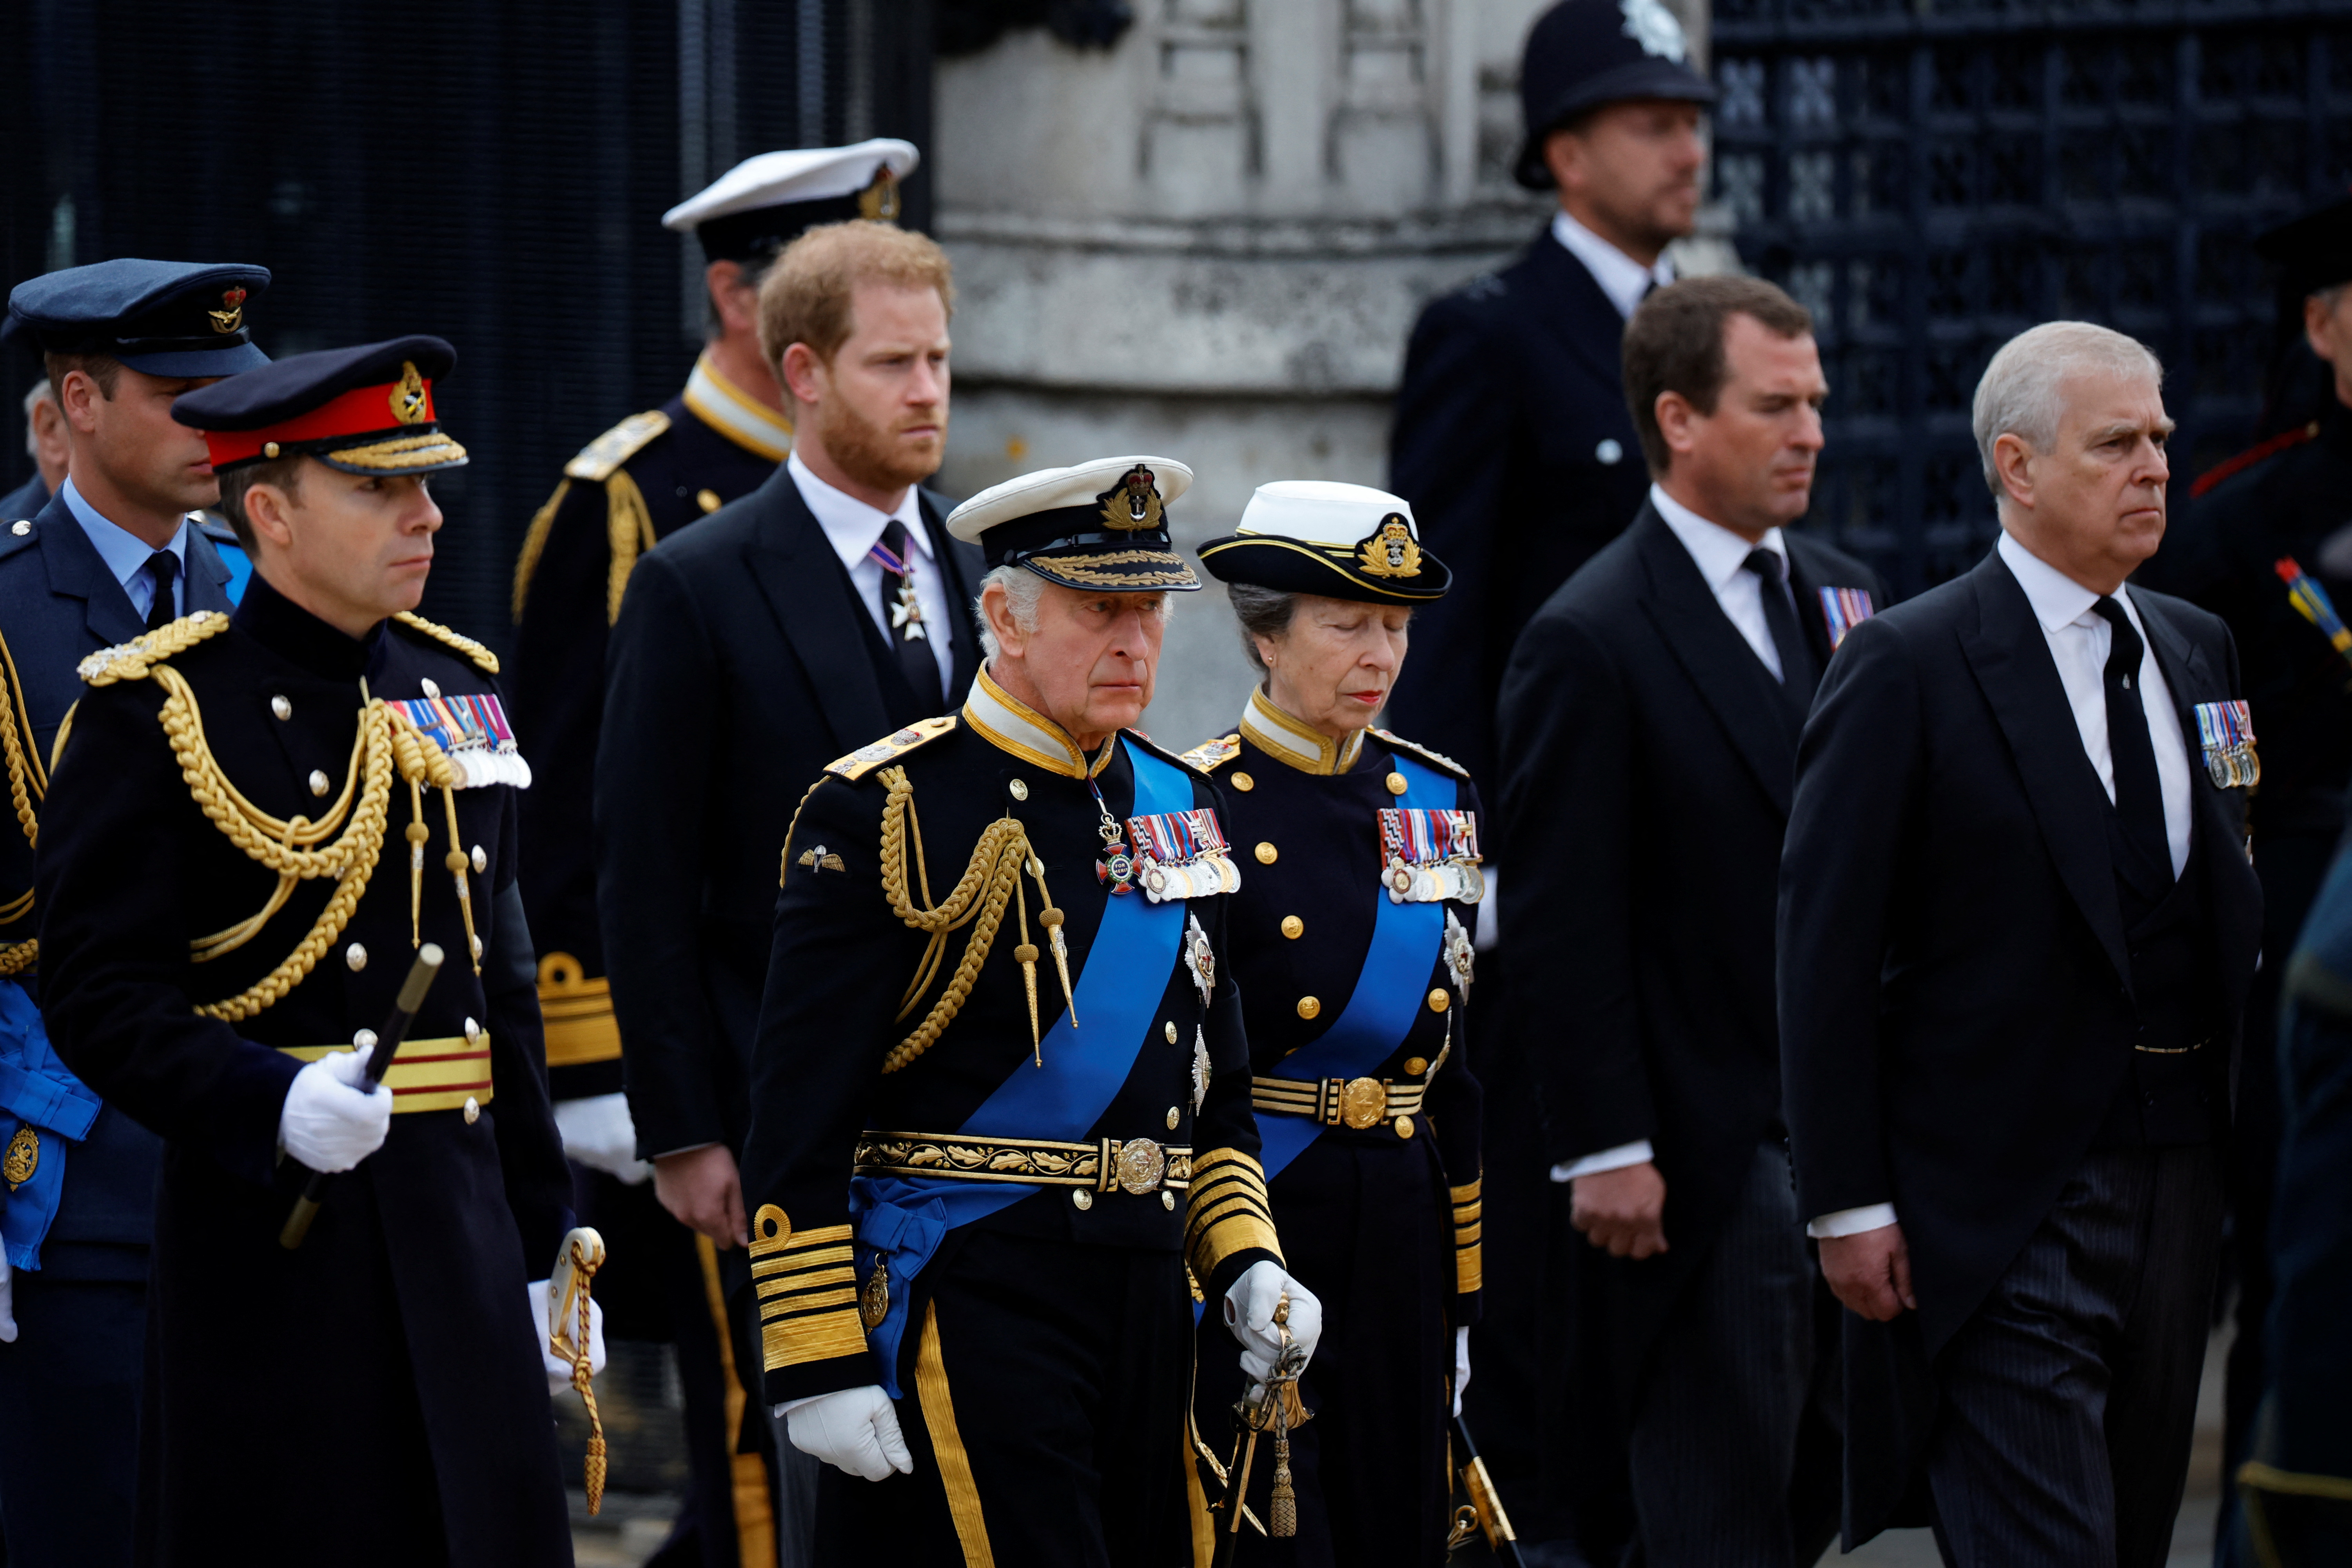 State funeral and burial of Queen Elizabeth